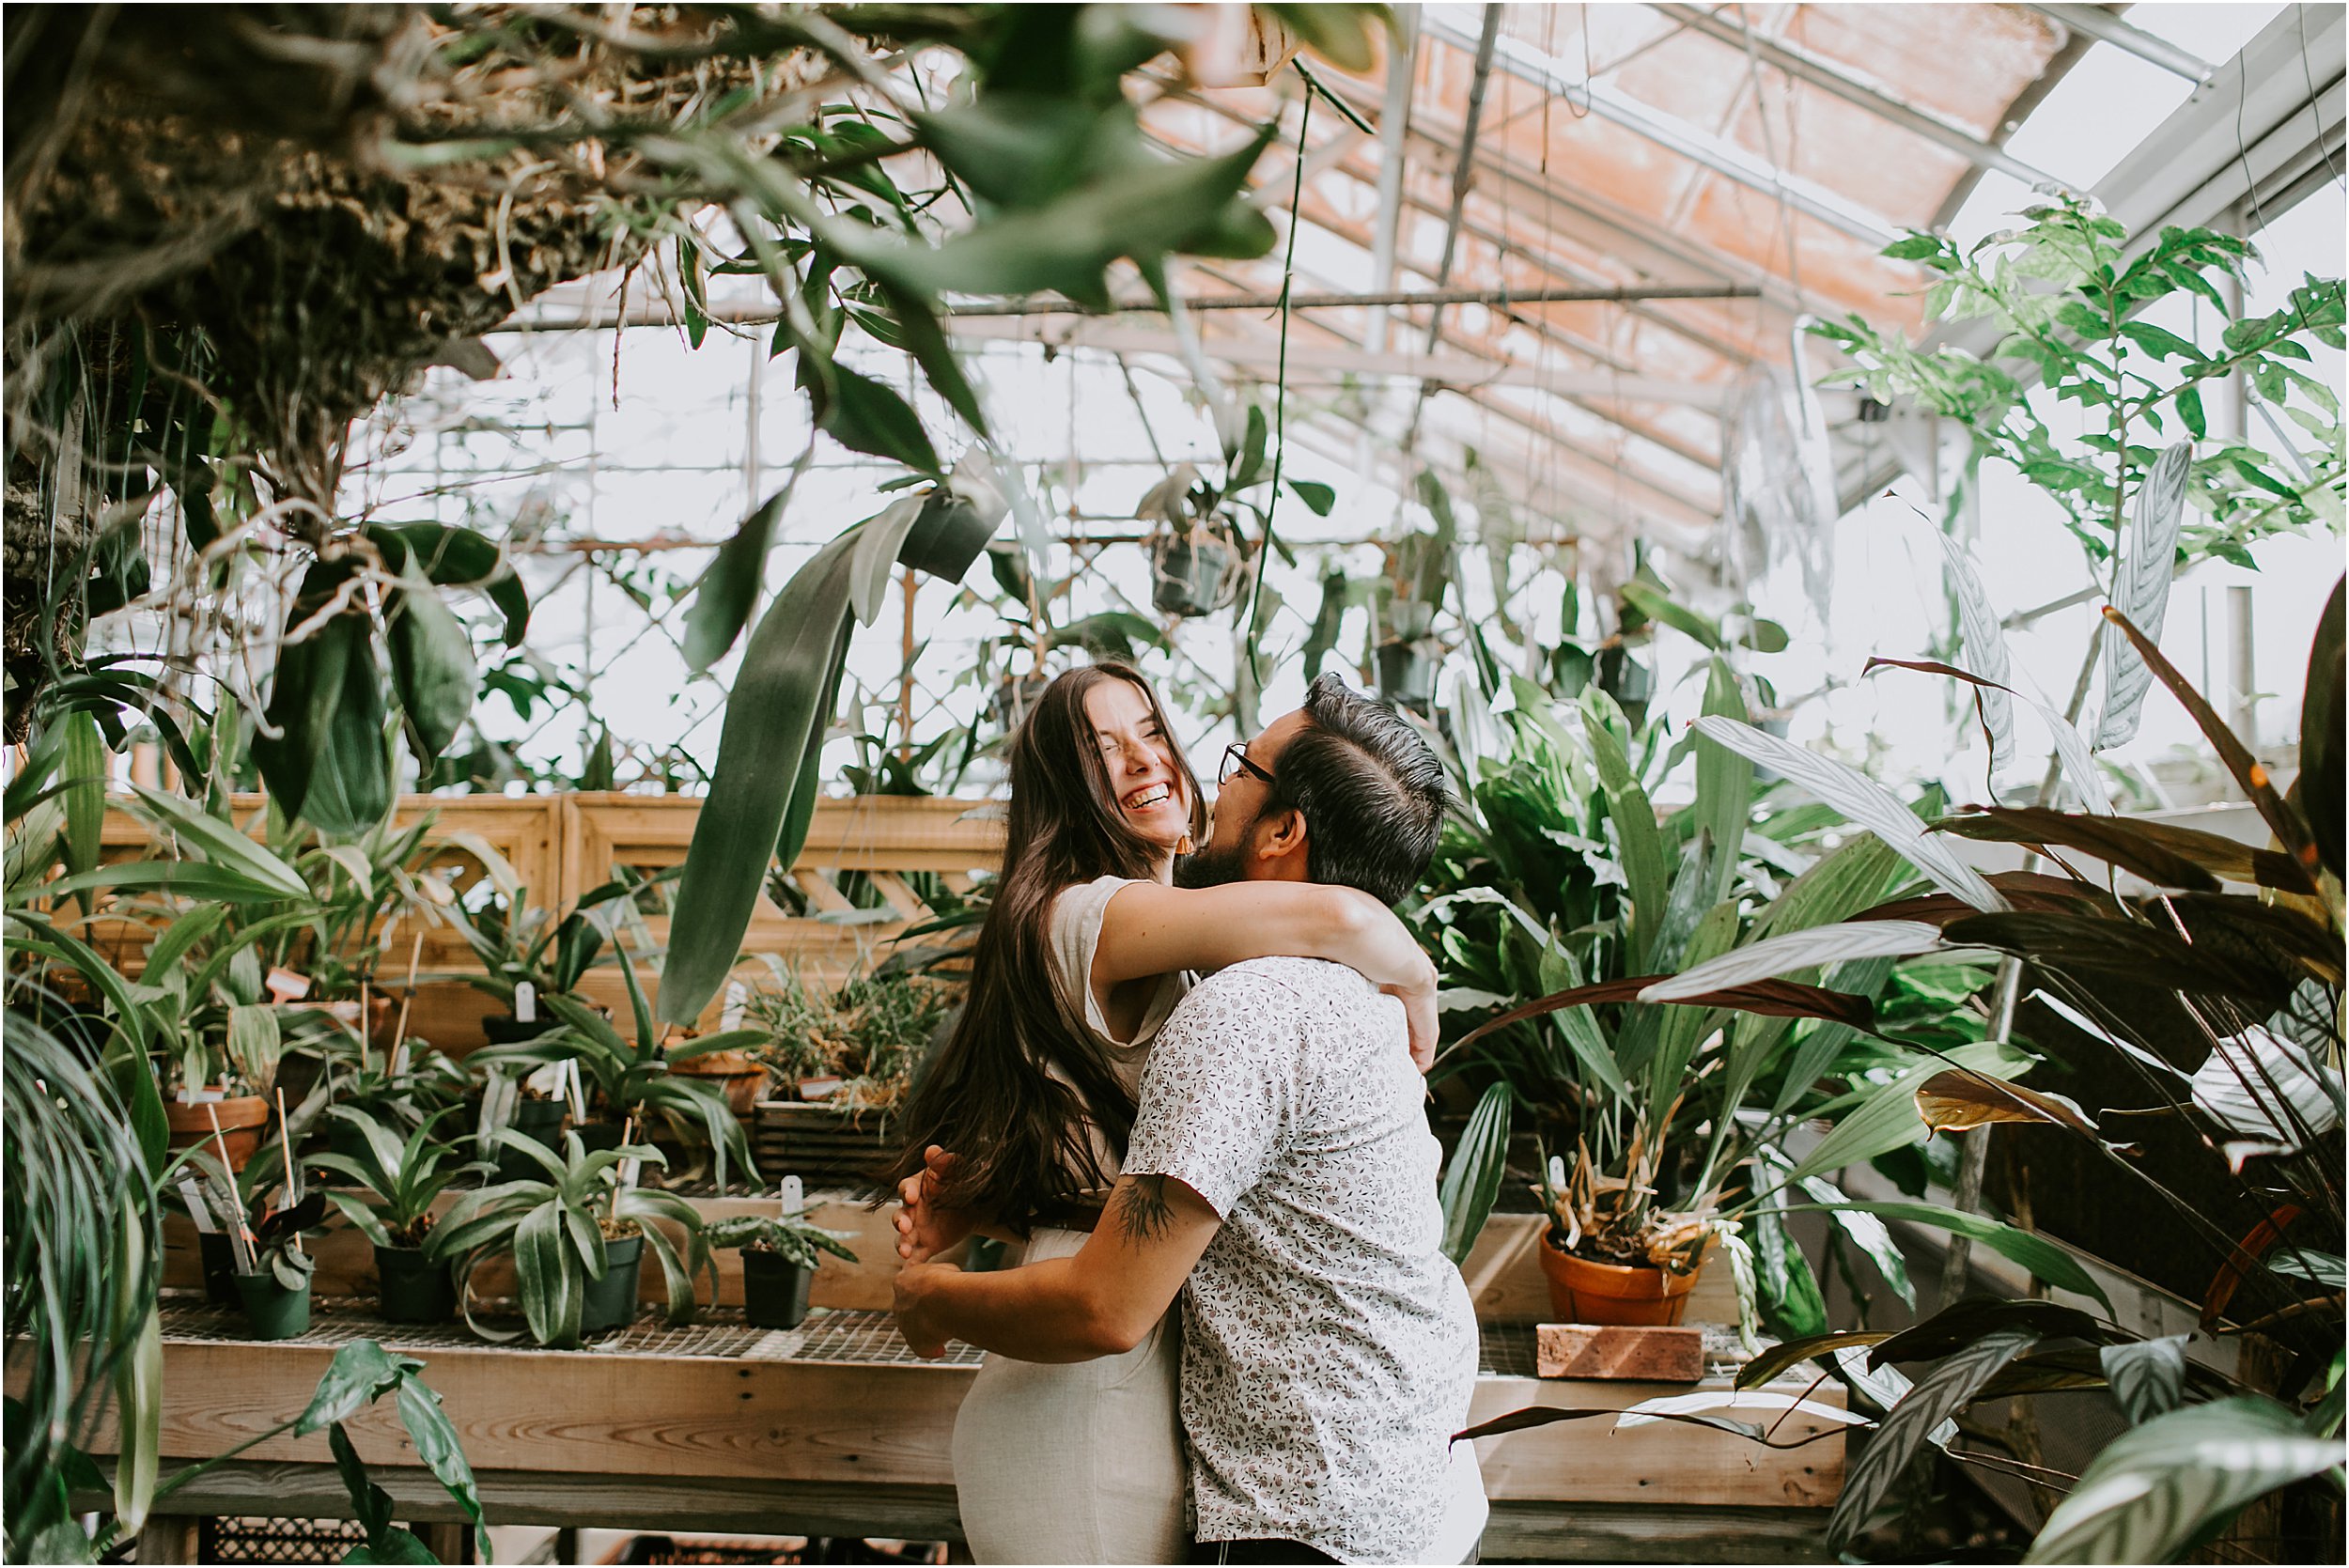  A couple is in a greenhouse surrounded by plants. They are embracing in a hug and she is laughing.  